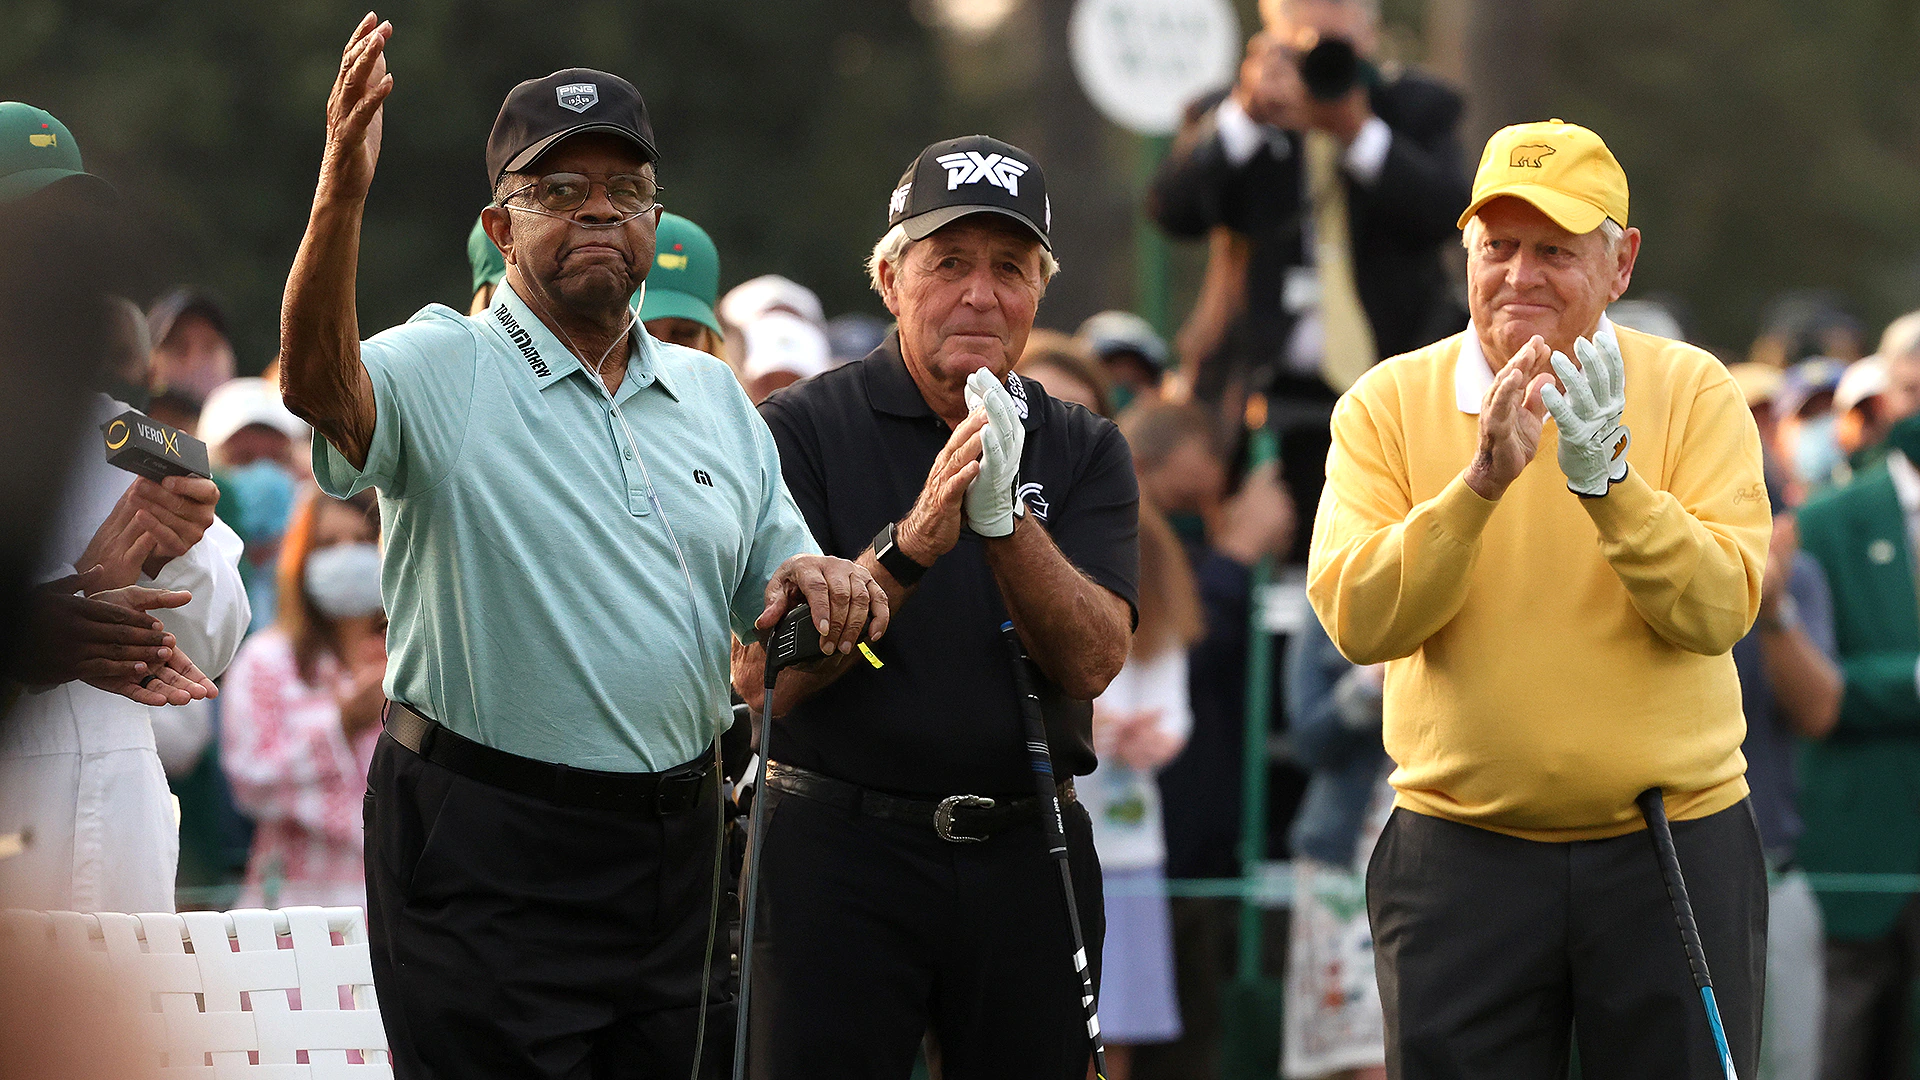 2021 Masters: Emotional Lee Elder joins Gary Player, Jack Nicklaus on first tee at Masters